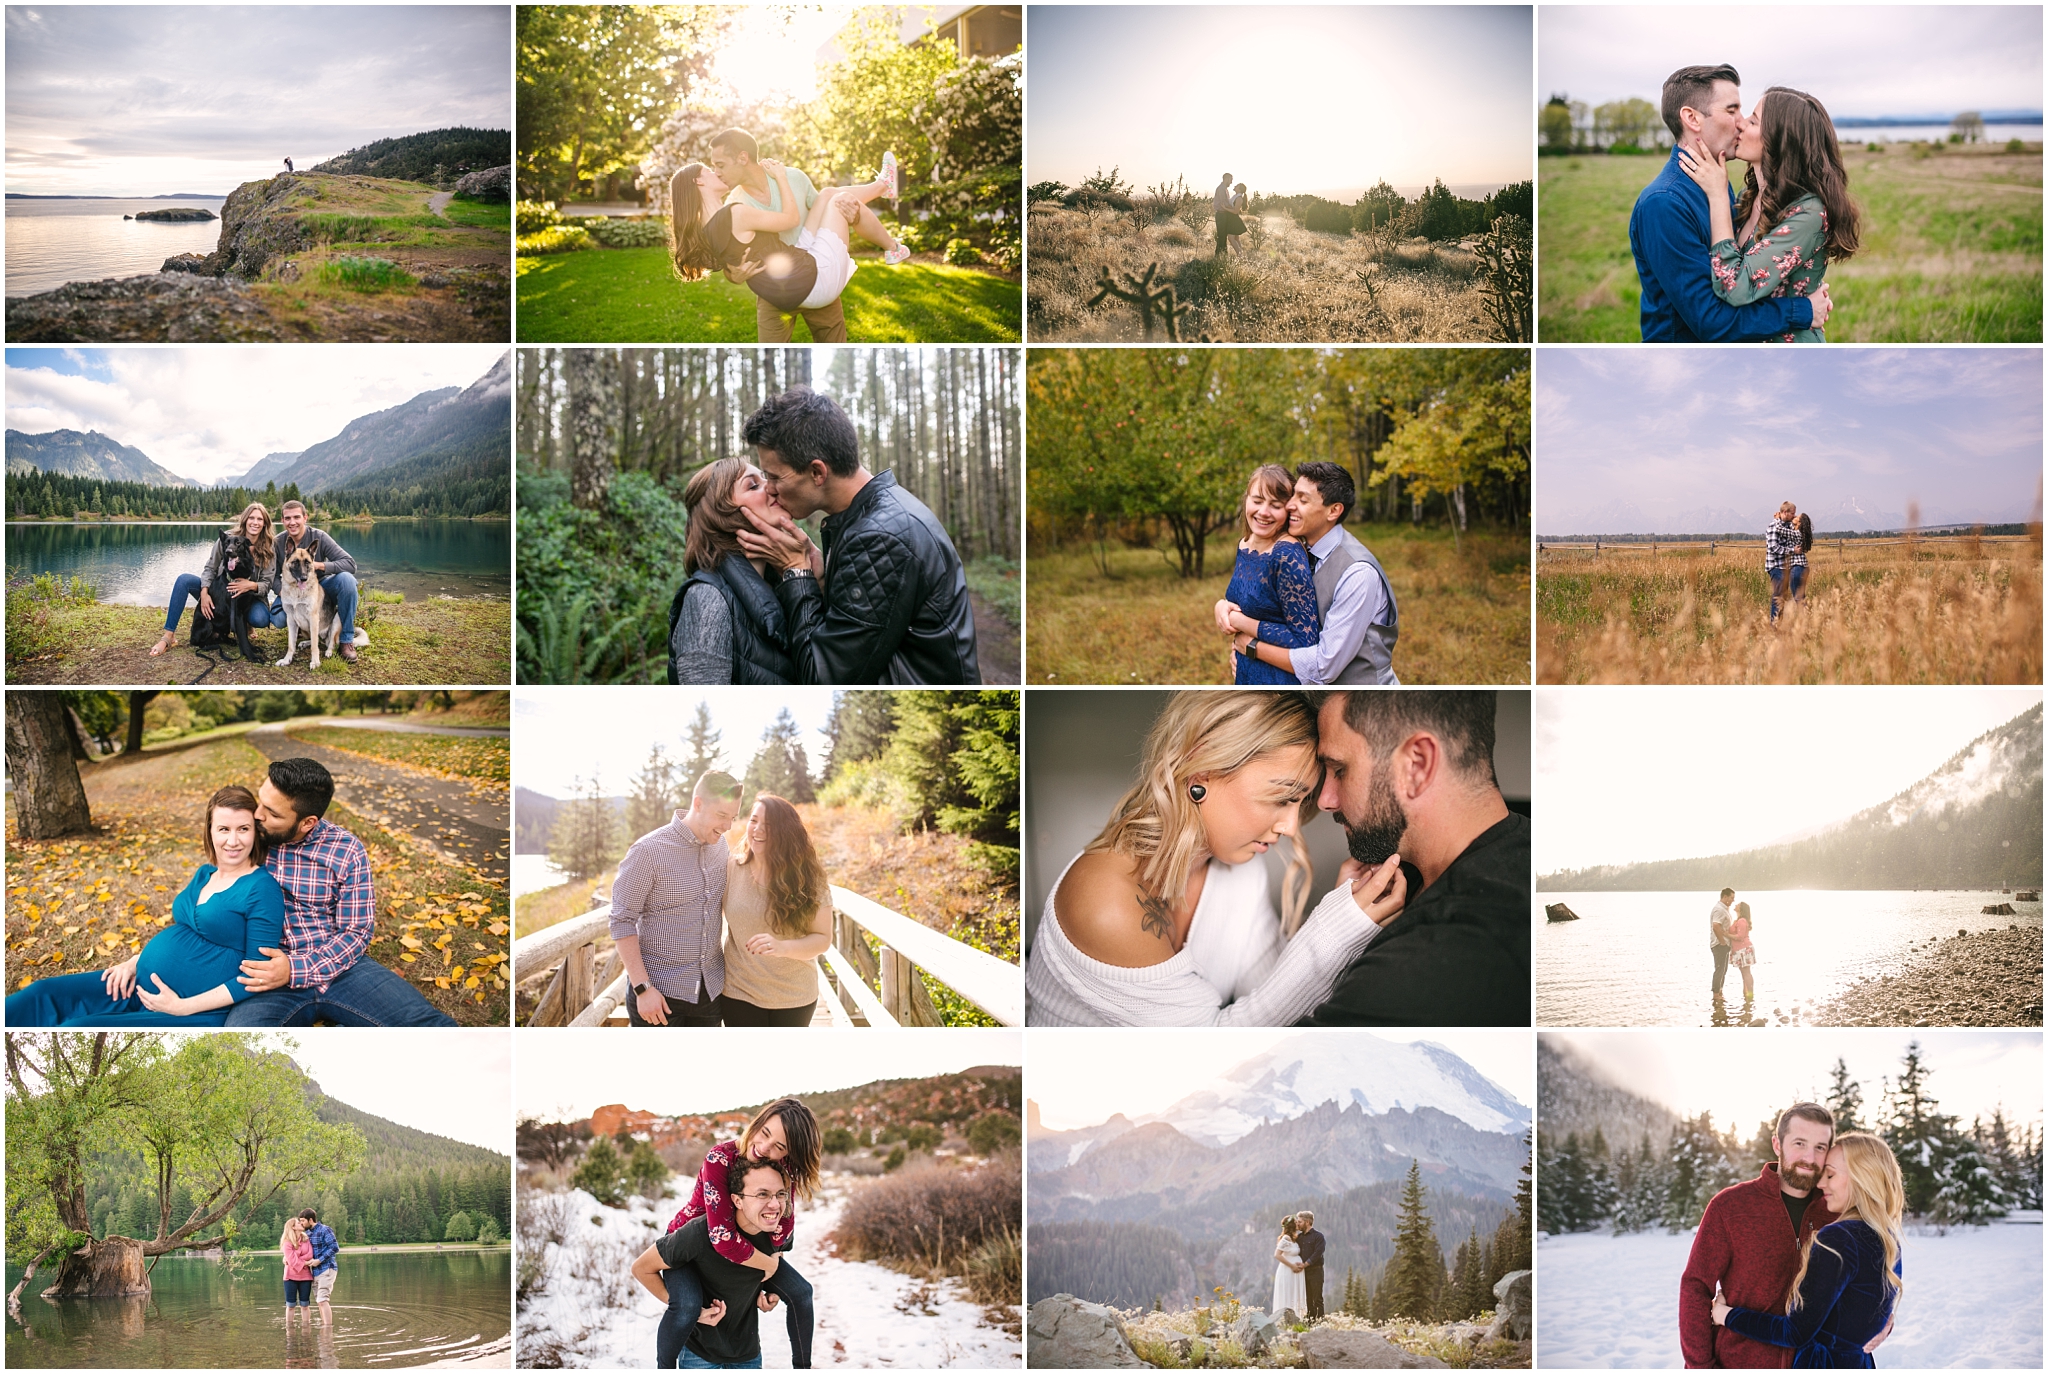 Denver wedding photographer 2018 year in review